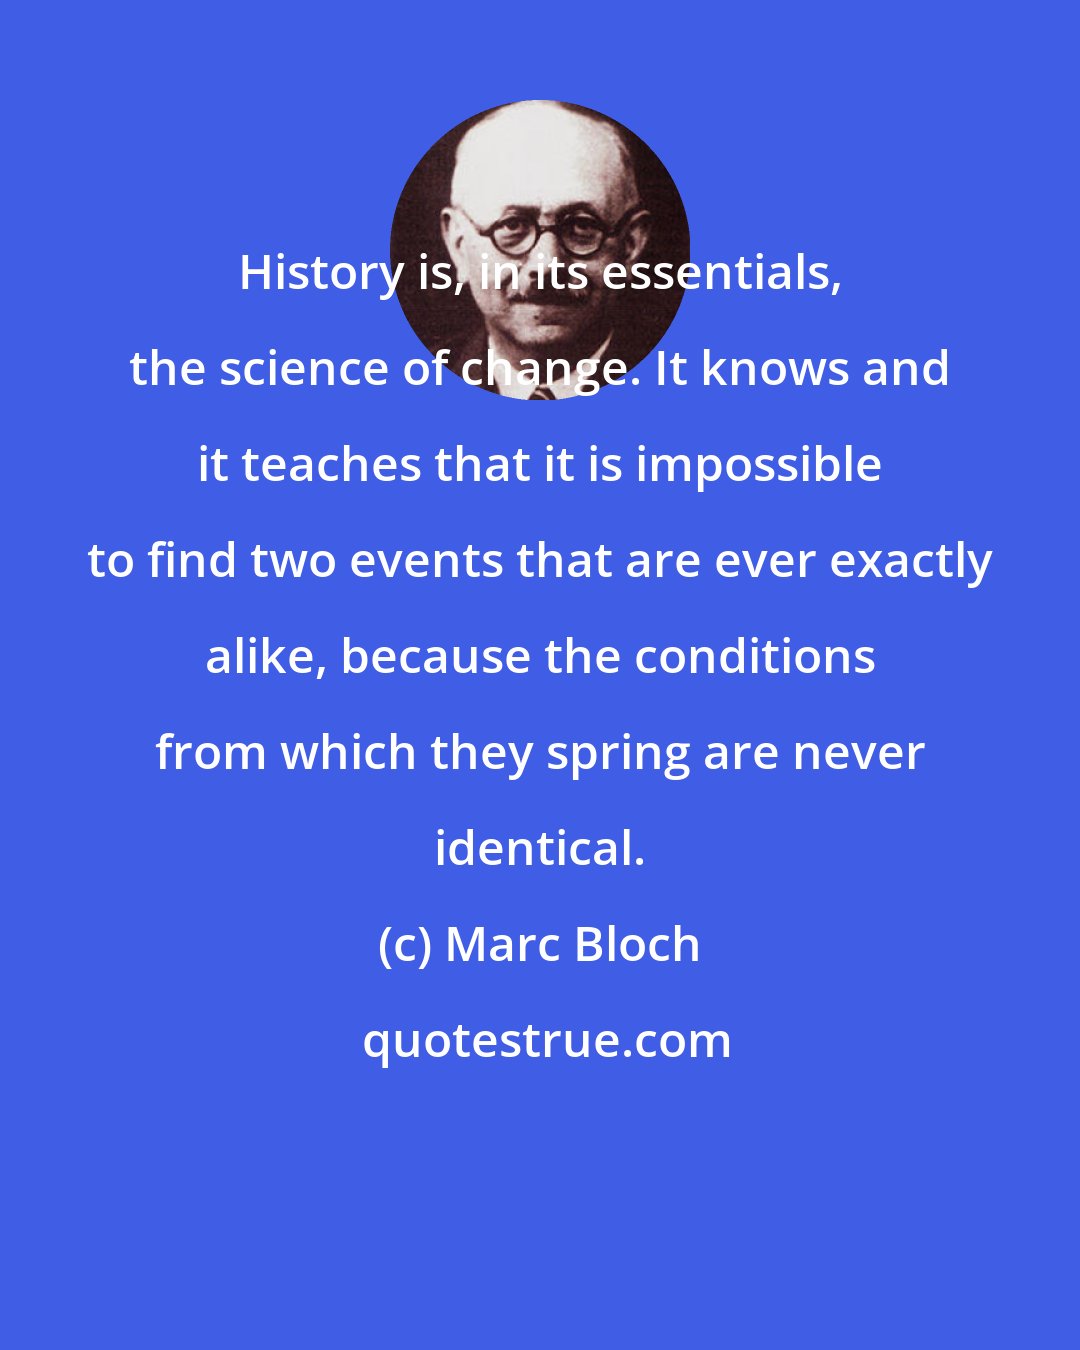 Marc Bloch: History is, in its essentials, the science of change. It knows and it teaches that it is impossible to find two events that are ever exactly alike, because the conditions from which they spring are never identical.